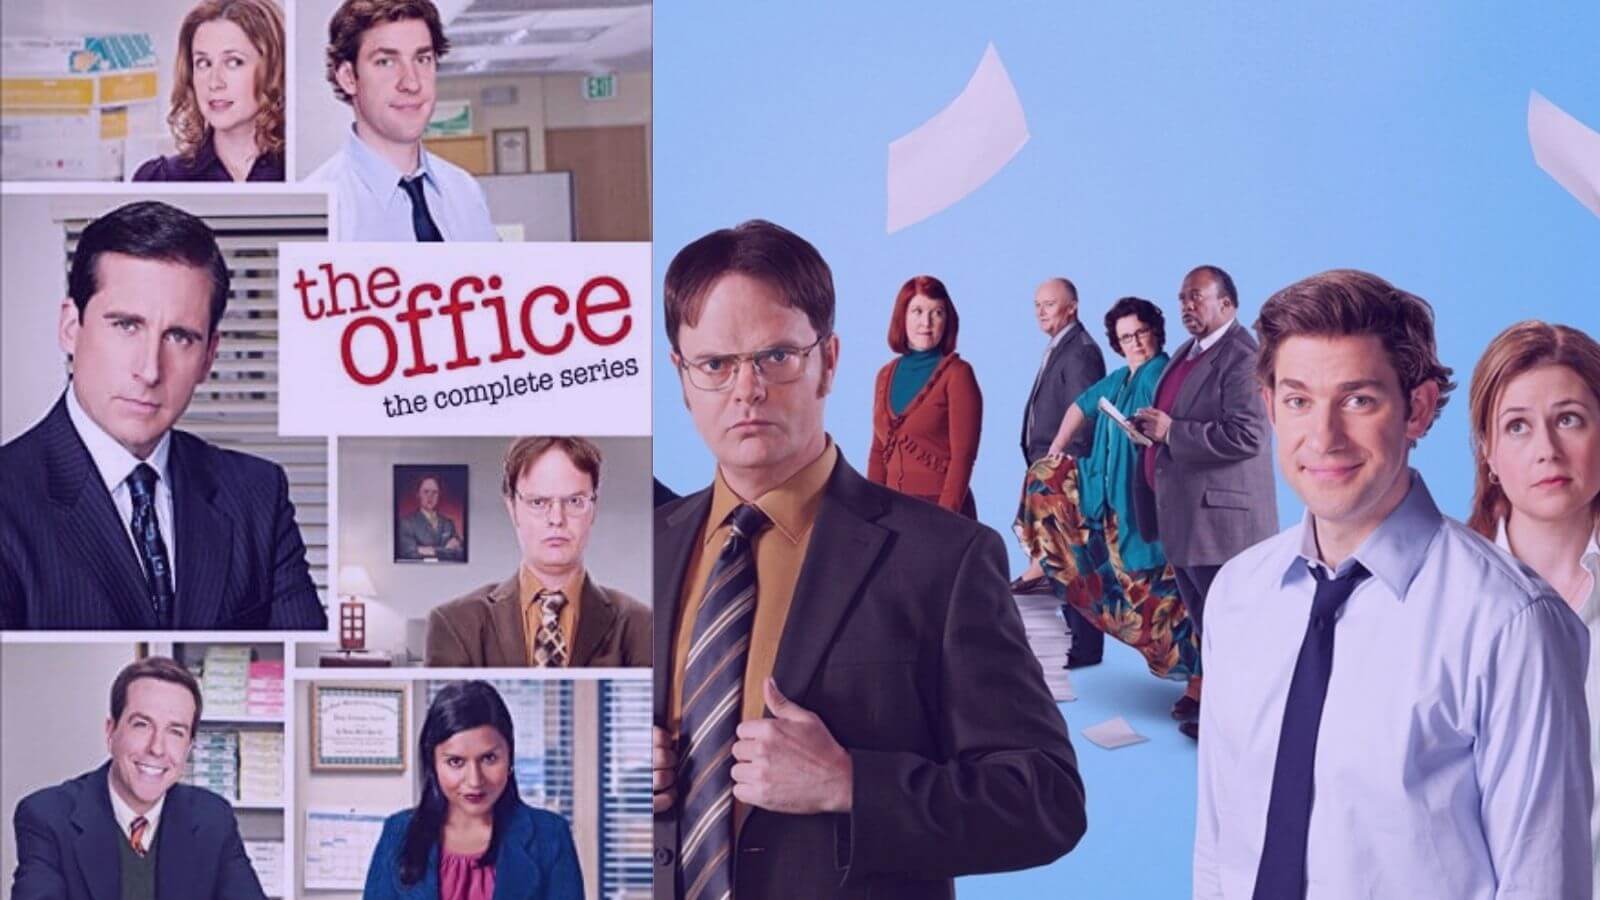 Where To Watch The Office Free kawevqbooking